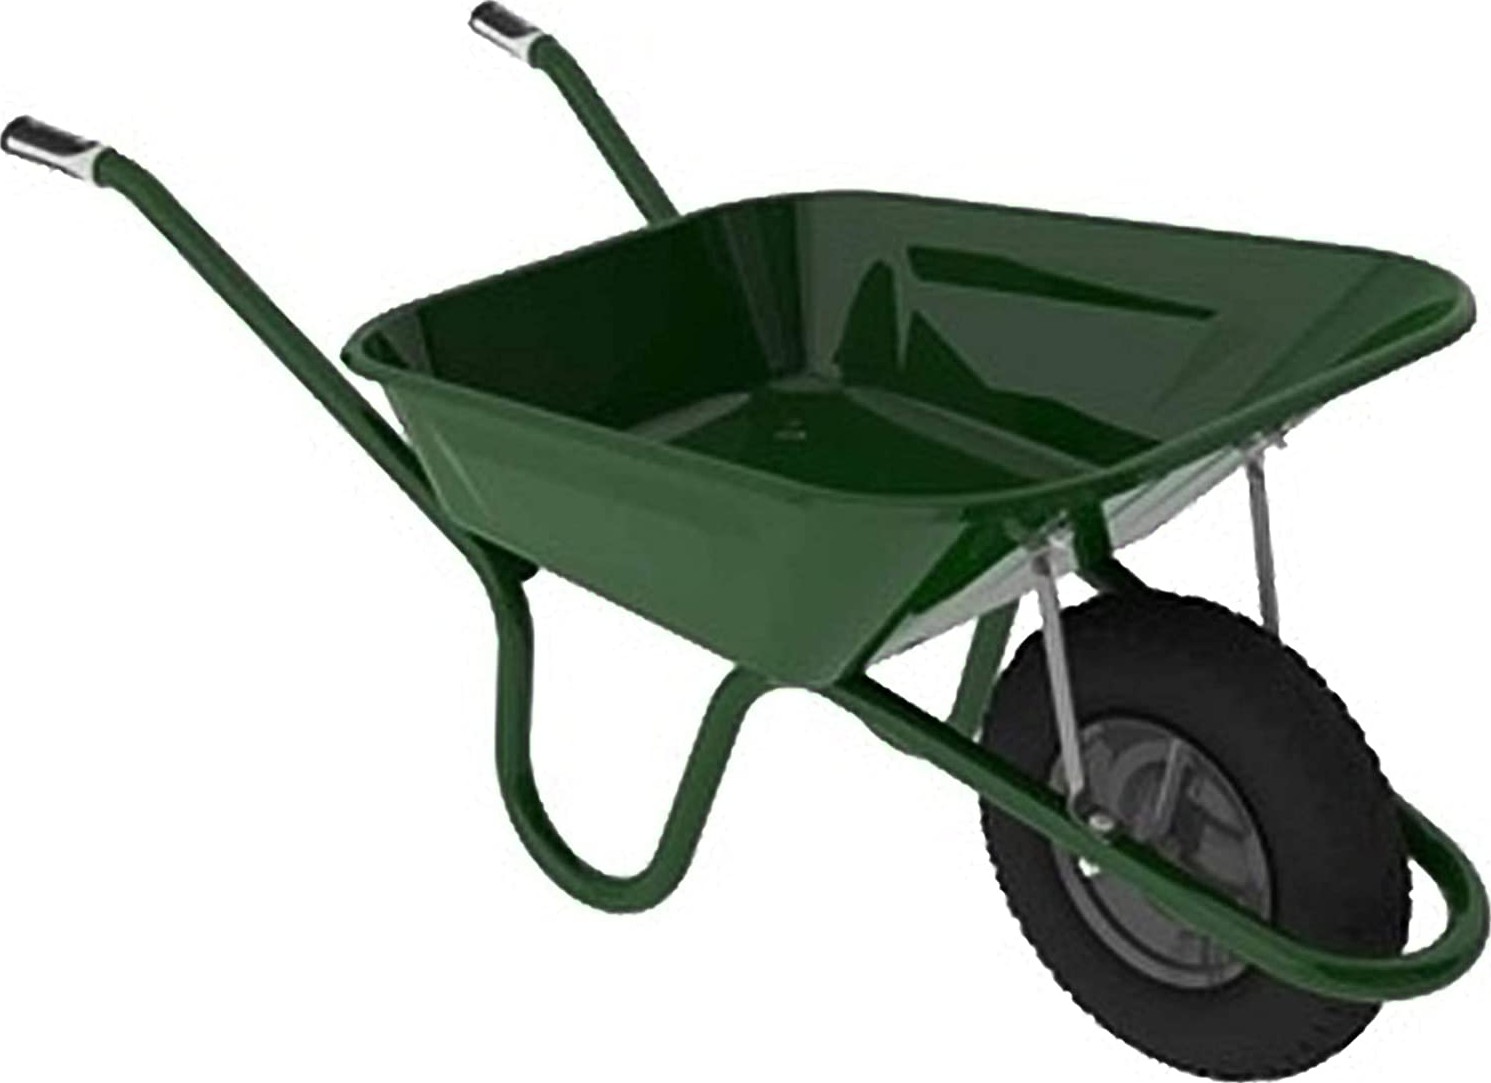 Garden Carts and Wheelbarrows market is estimated to be valued at US$ 2.78 Billion In 2023 and is expected to exhibit a CAGR Of 7% over the forecast period 2023-2030